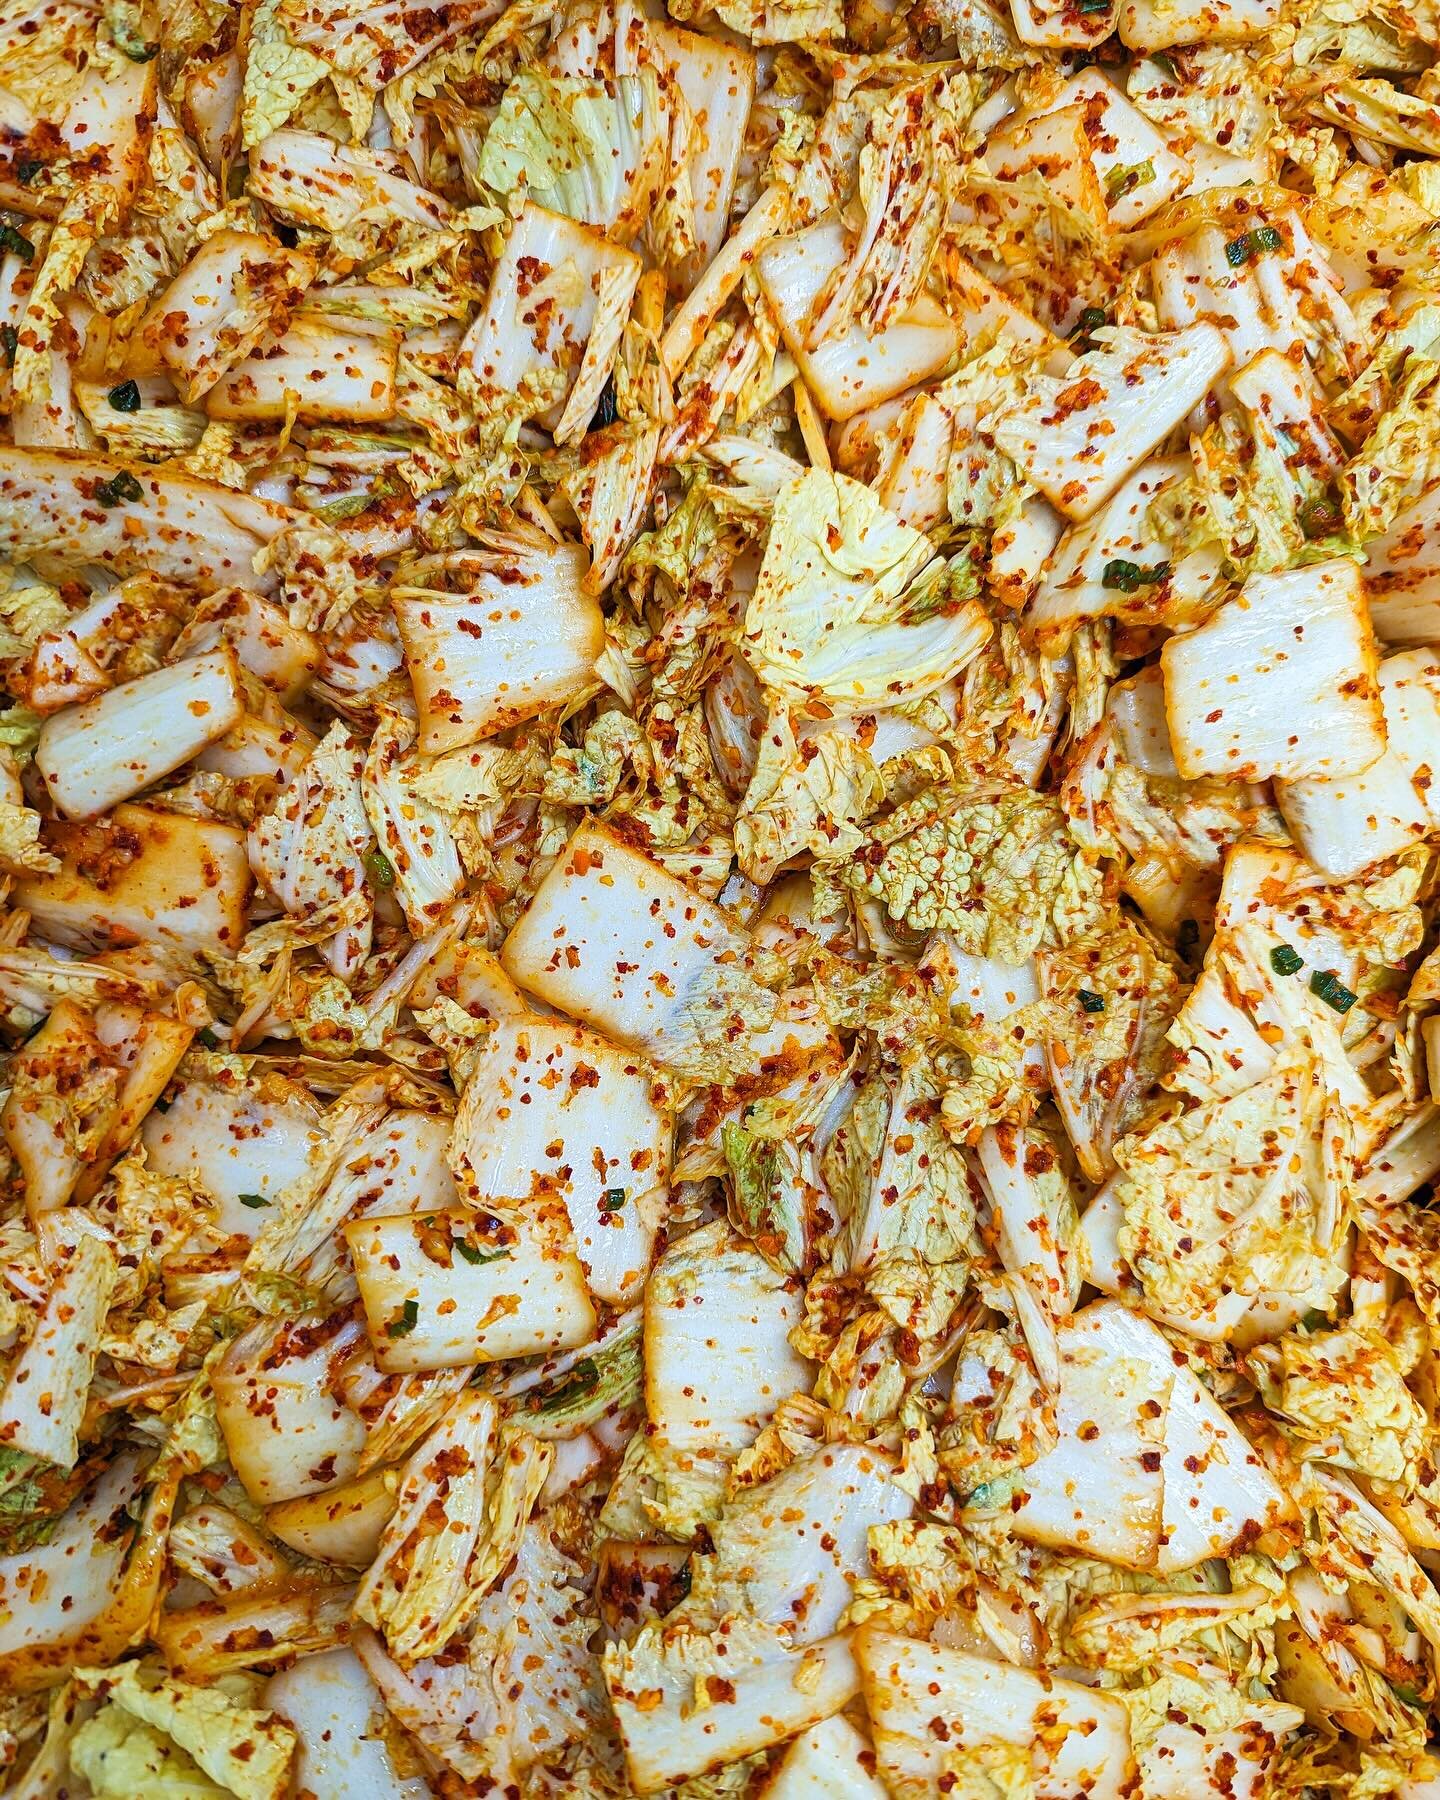 🌿🌶️ Product Spotlight on Our Vegan Turmeric Kimchi 🌶️🌿

Feast your eyes on the vibrant ingredients of our Vegan Turmeric Kimchi. This unique creation combines napa cabbage, Korean red pepper flakes, turmeric, garlic, scallion, and sea salt into a